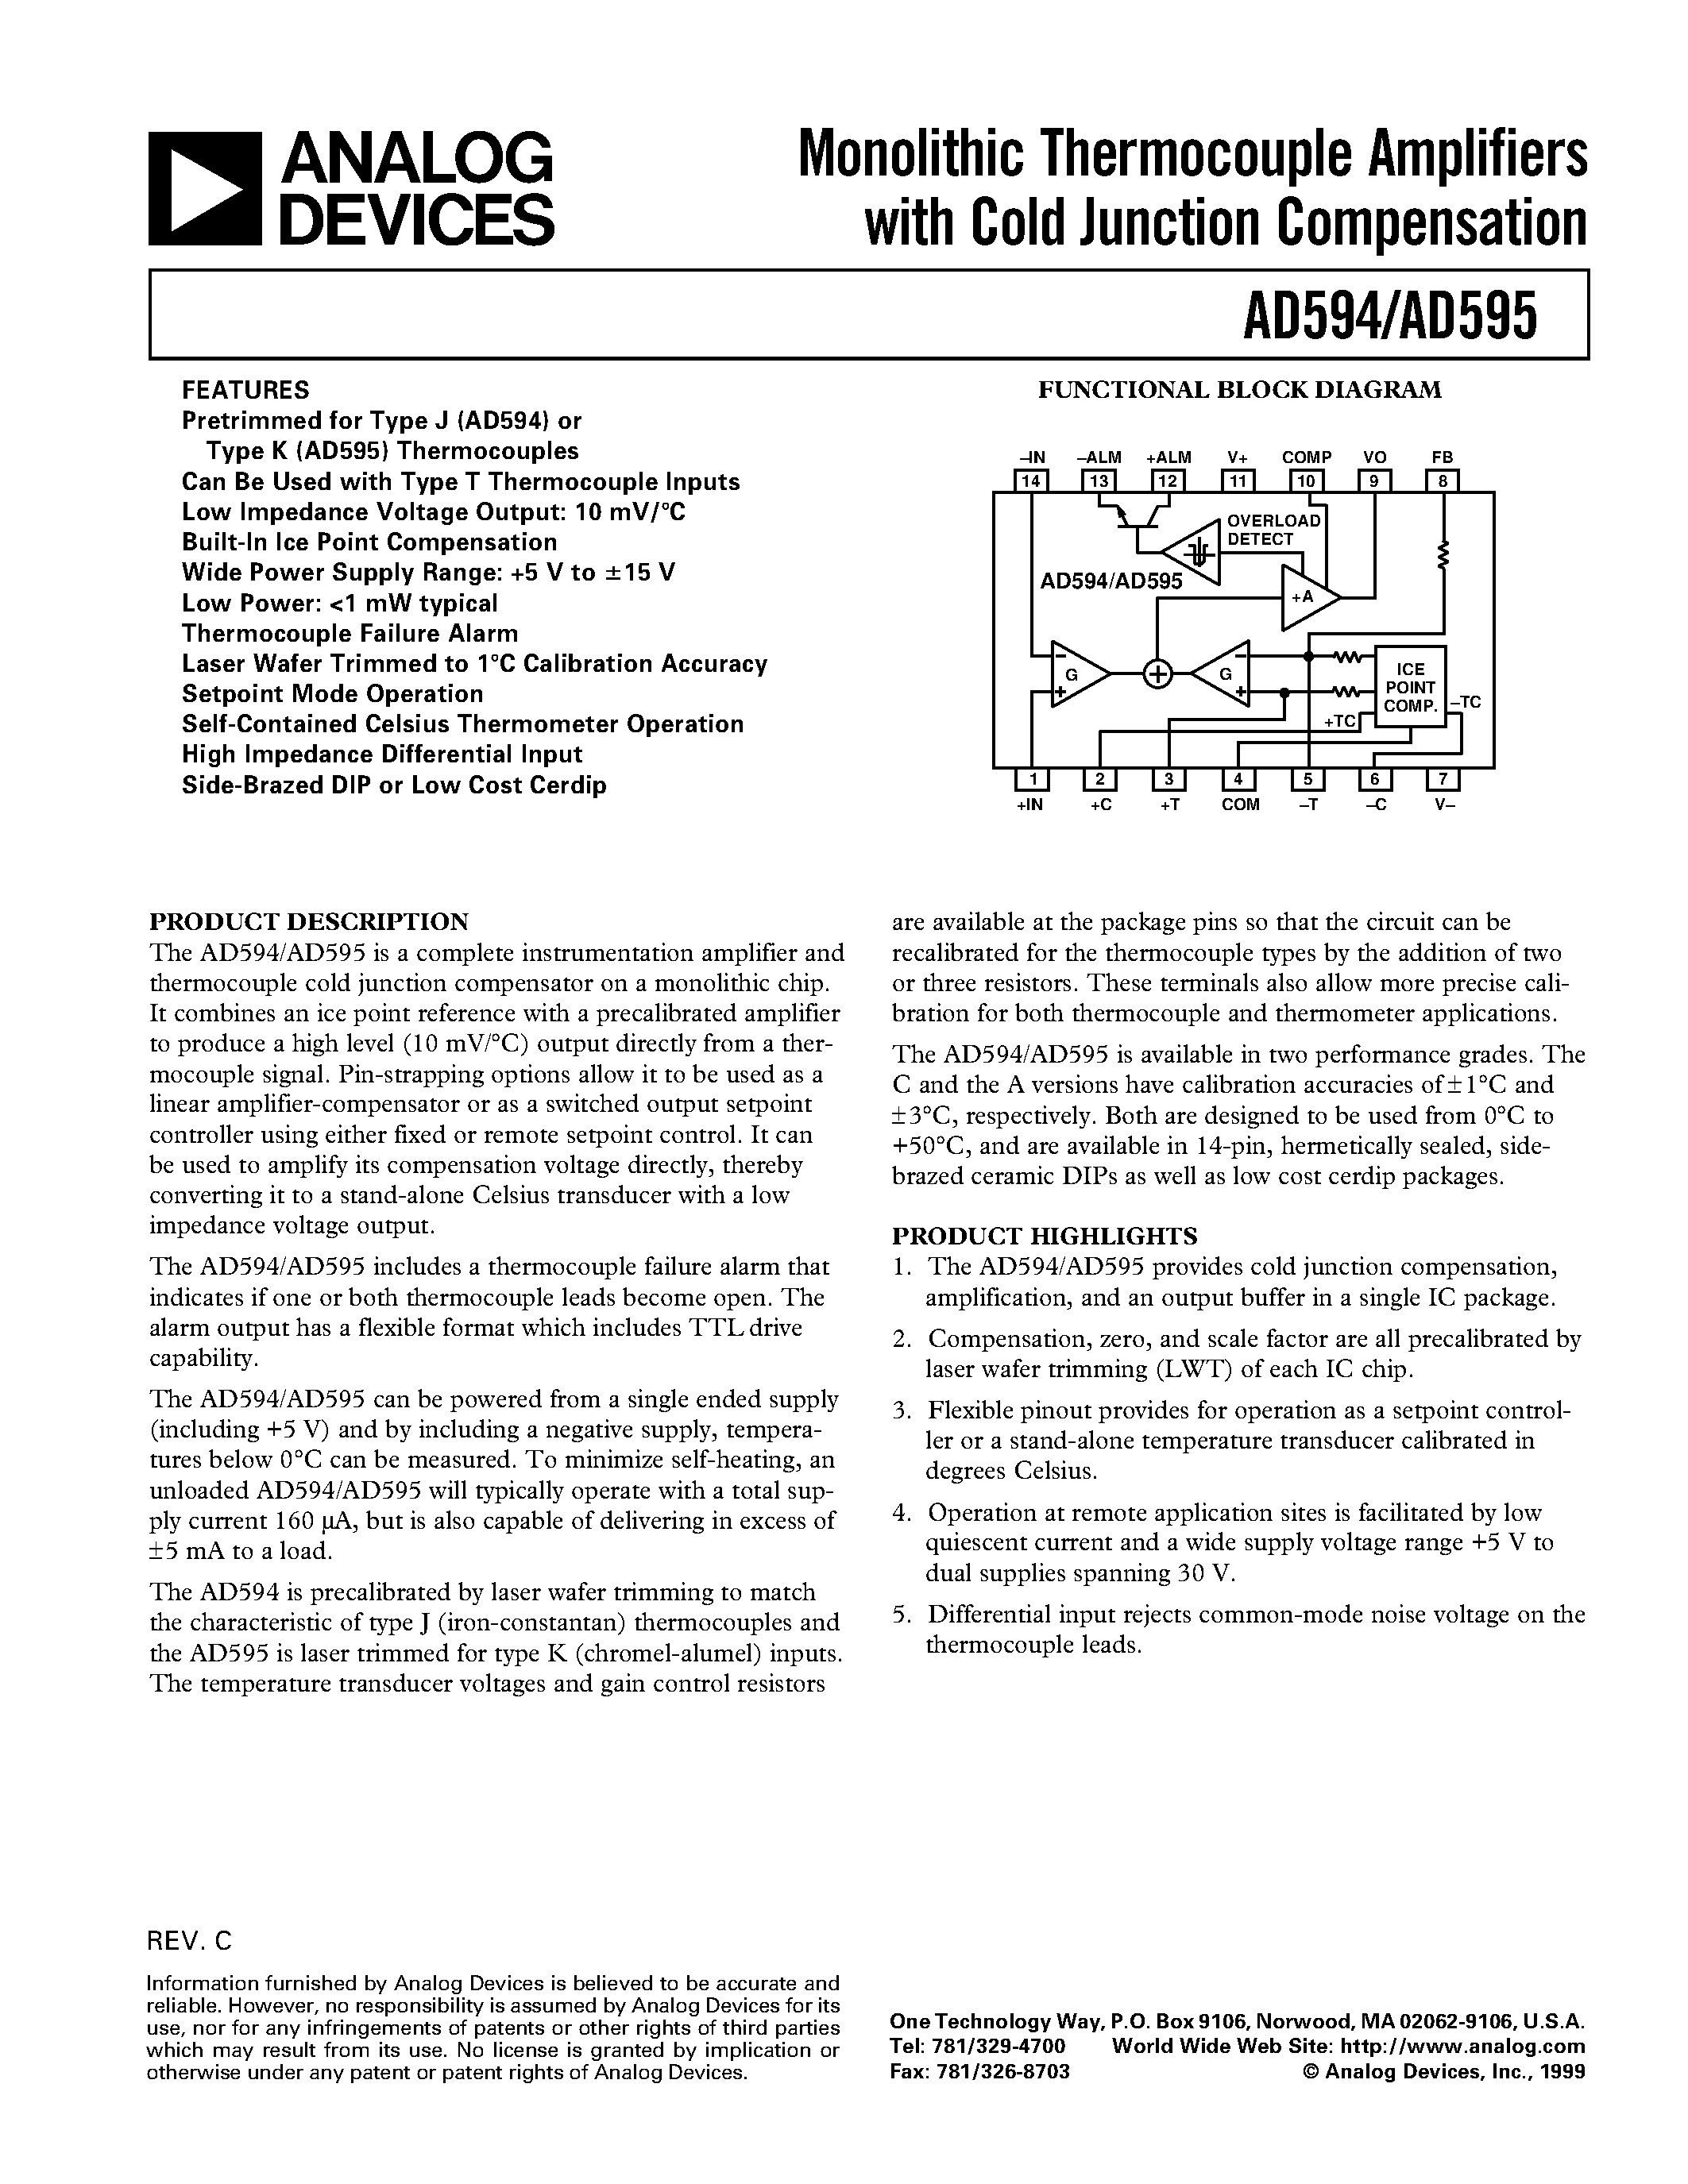 Datasheet AD595CD - Monolithic Thermocouple Amplifiers with Cold Junction Compensation page 1